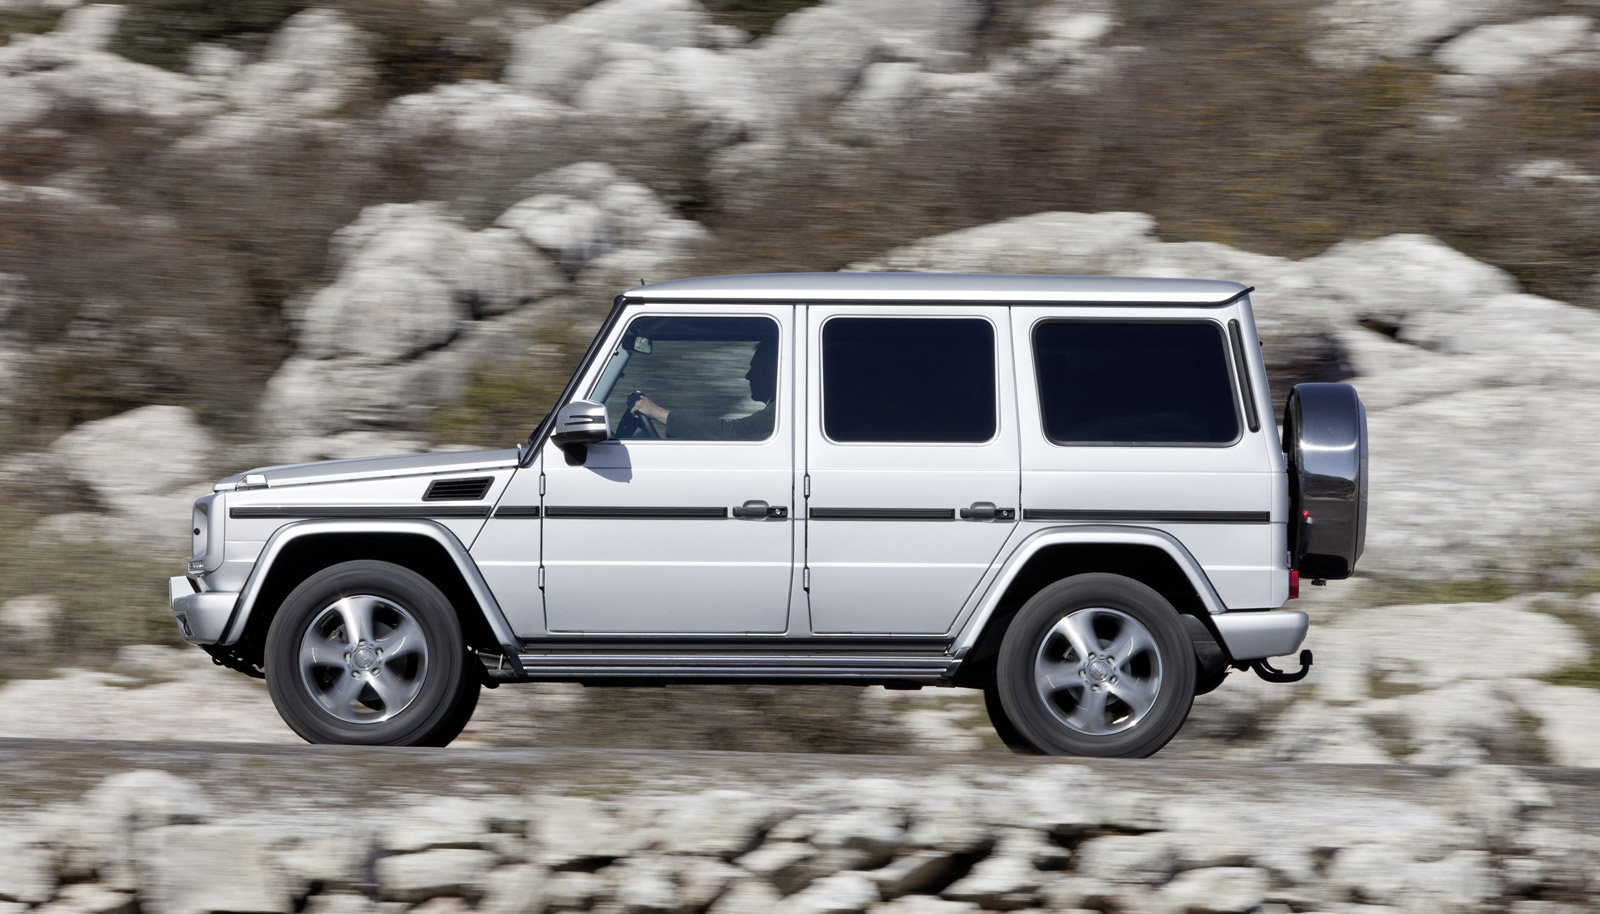 Mercedes Benz Announces G65 Amg Power And Price Both Ridiculous